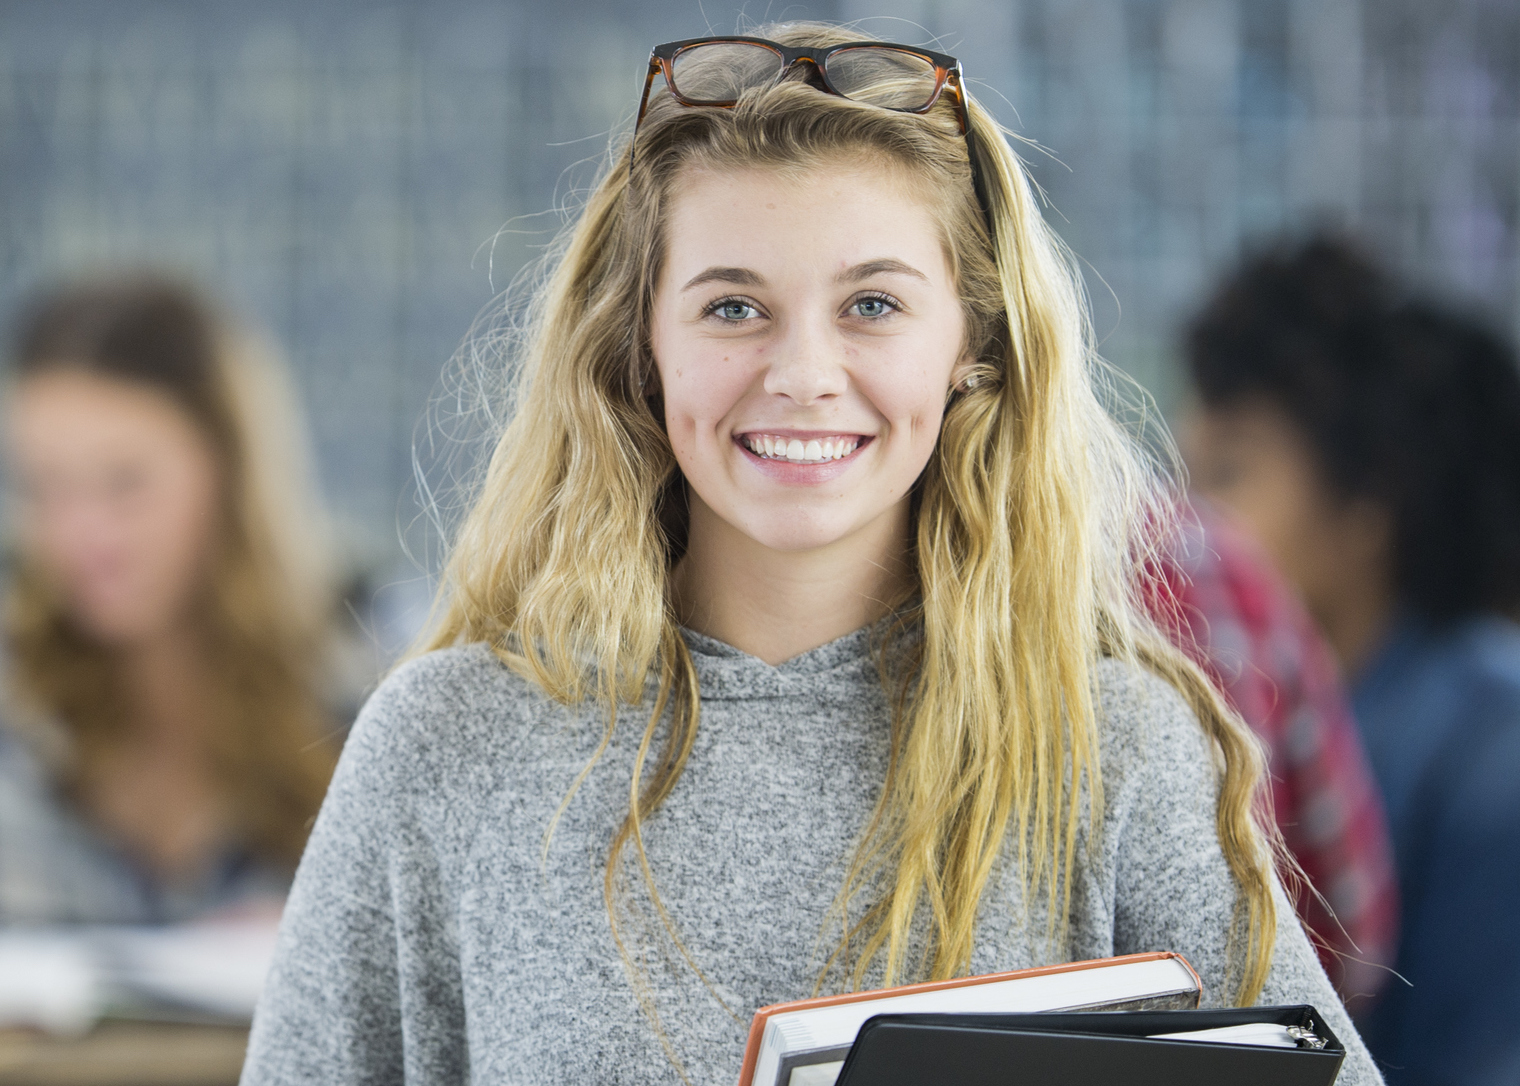 A Caucasian woman is smiling and holding textbooks and binders